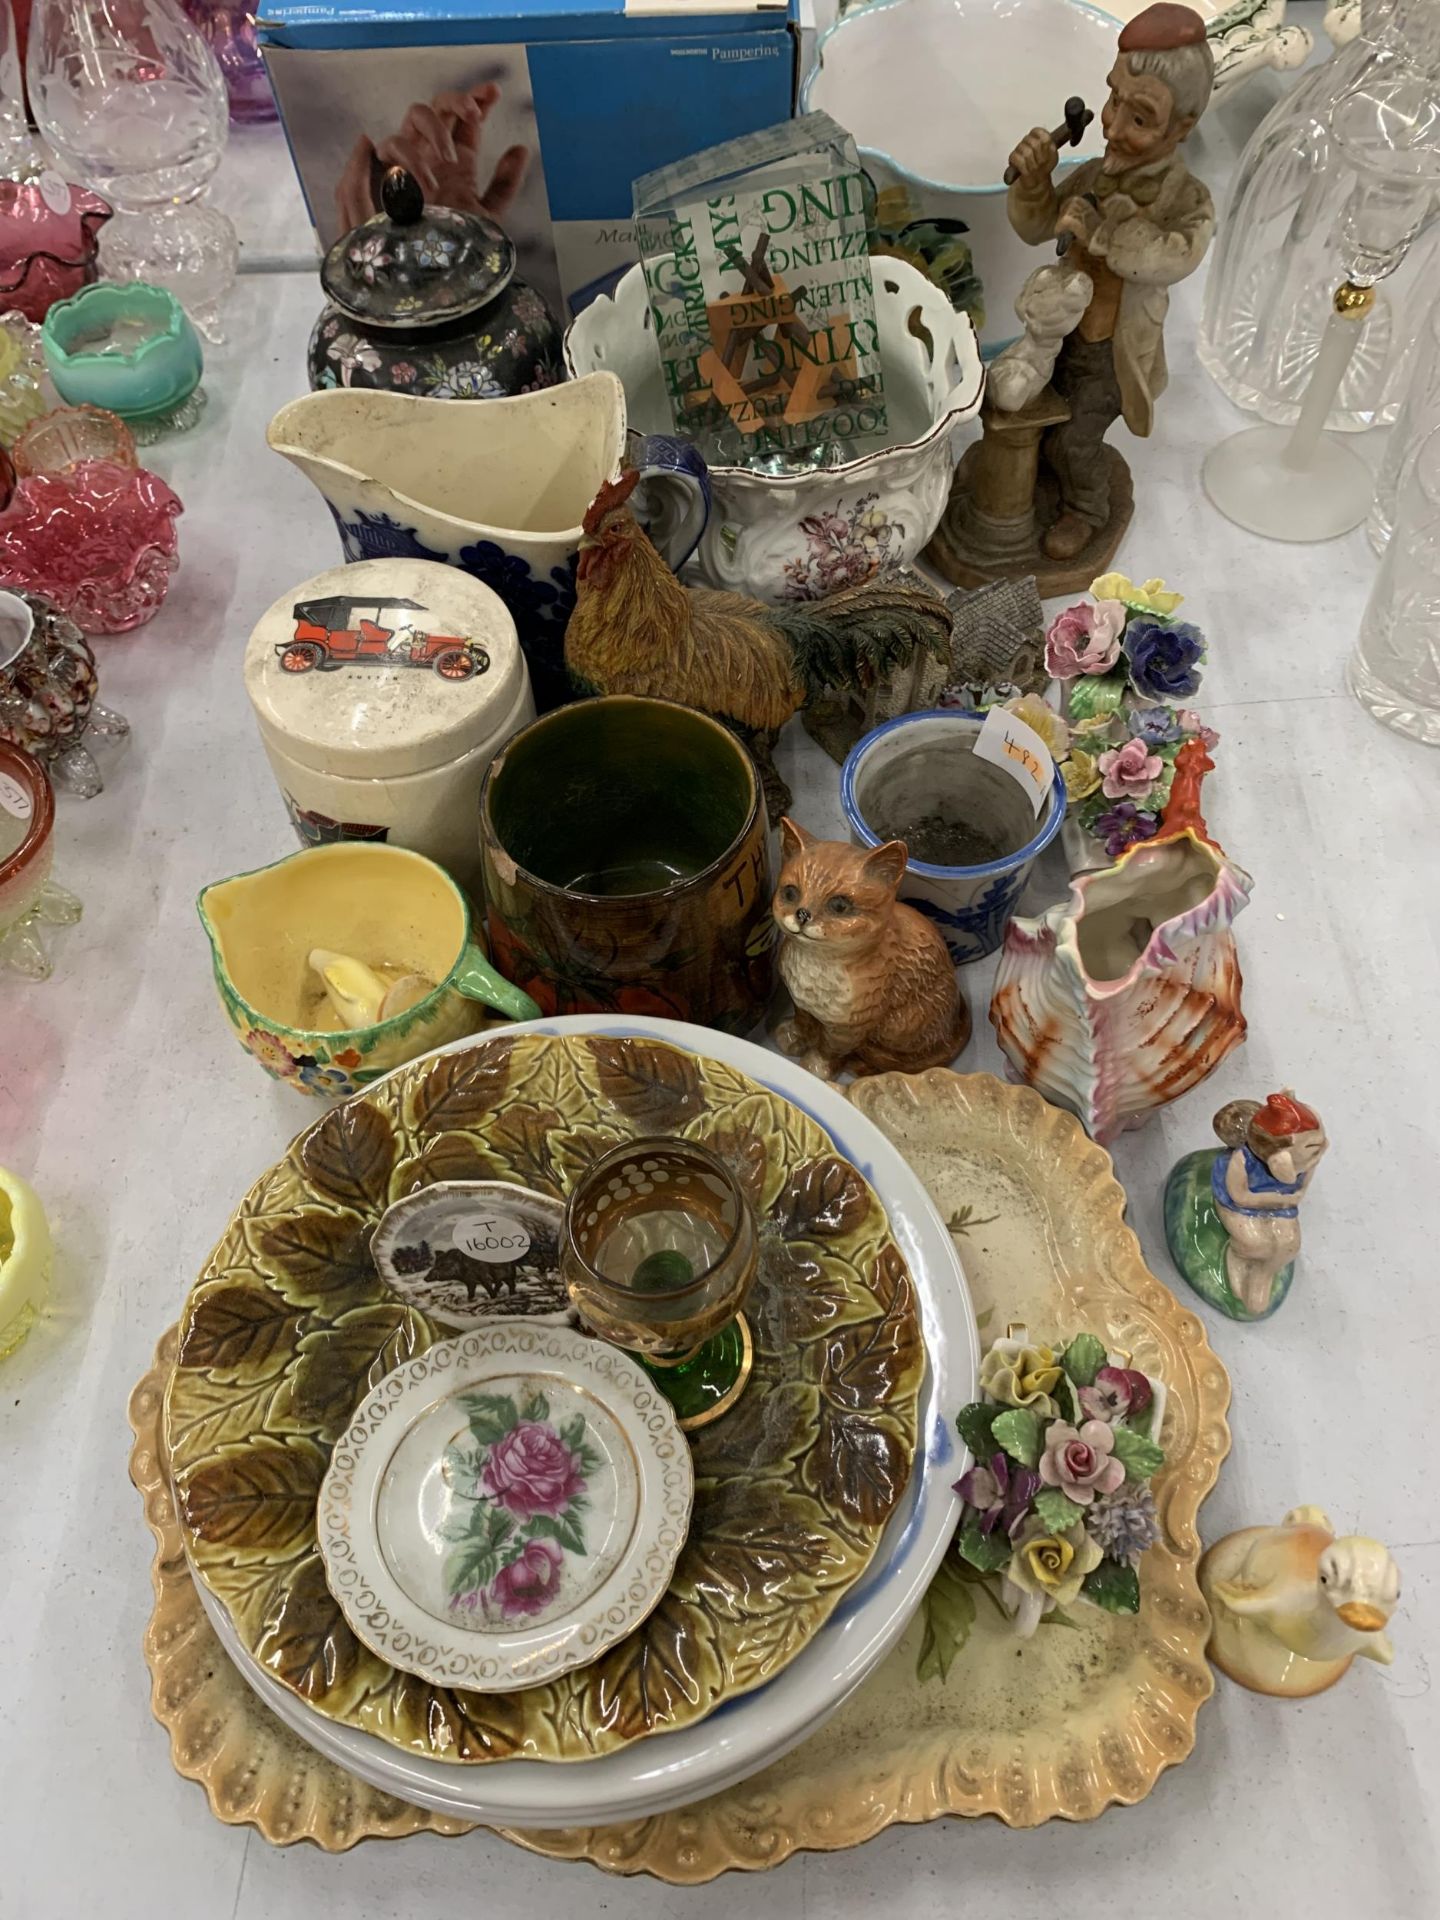 A QUANTITY OF VINTAGE CERAMIC ITEMS TO INCLUDE PLANTERS, PLATES, FIGURES, JUGS, ETC - SOME A/F